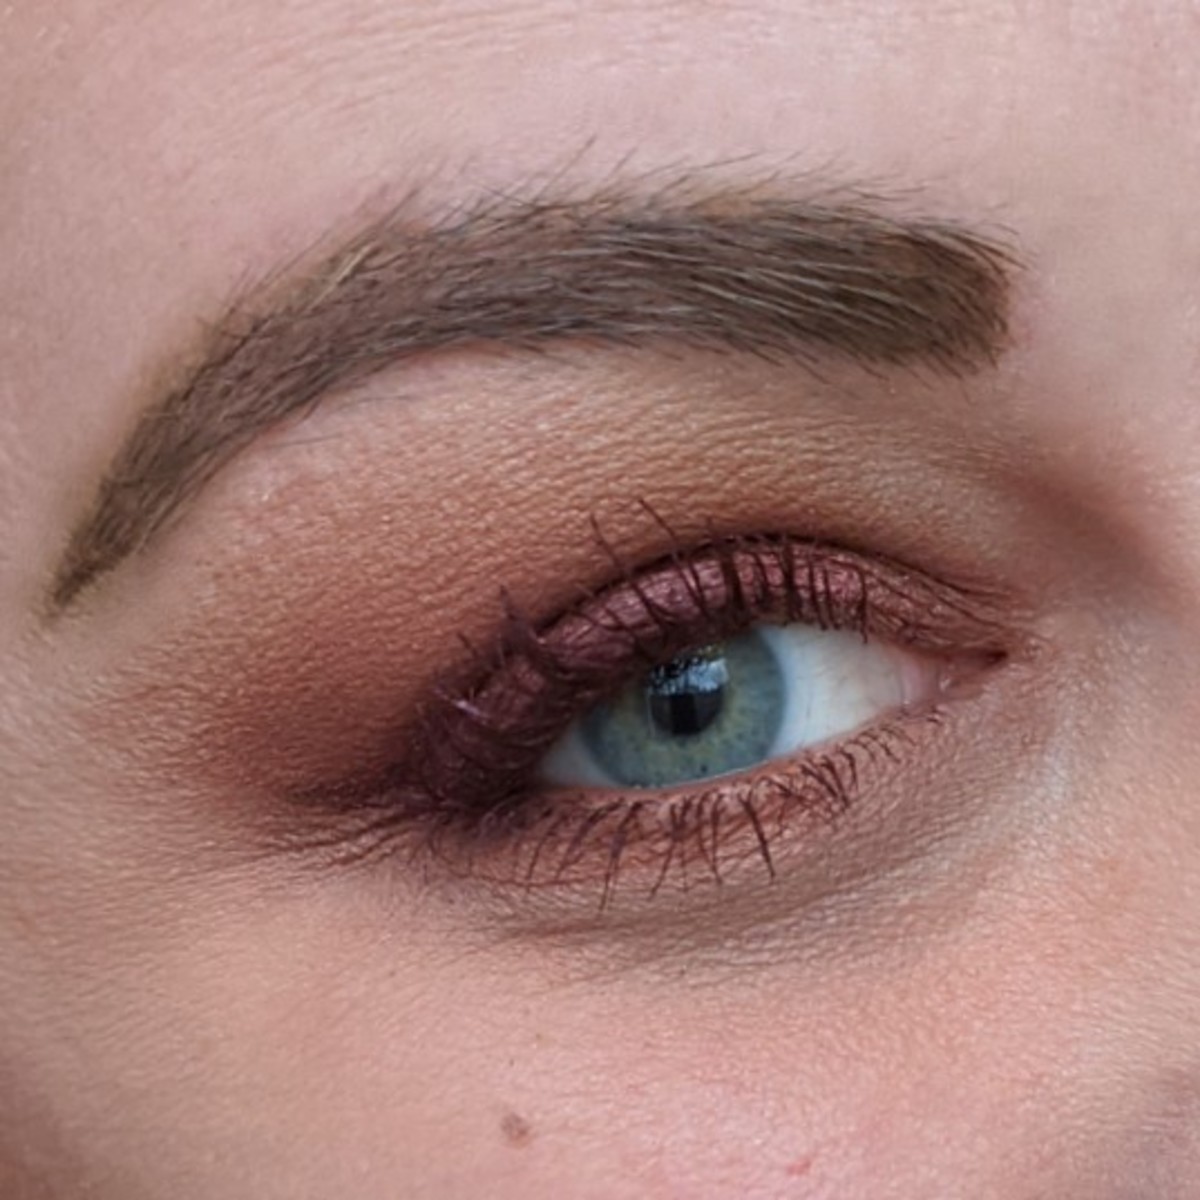 Here's me with a monochromatic red and burgundy makeup look using the Urban Decay Naked Heat Palette and L'Oreal Voluminizing Mascara in Burgundy.